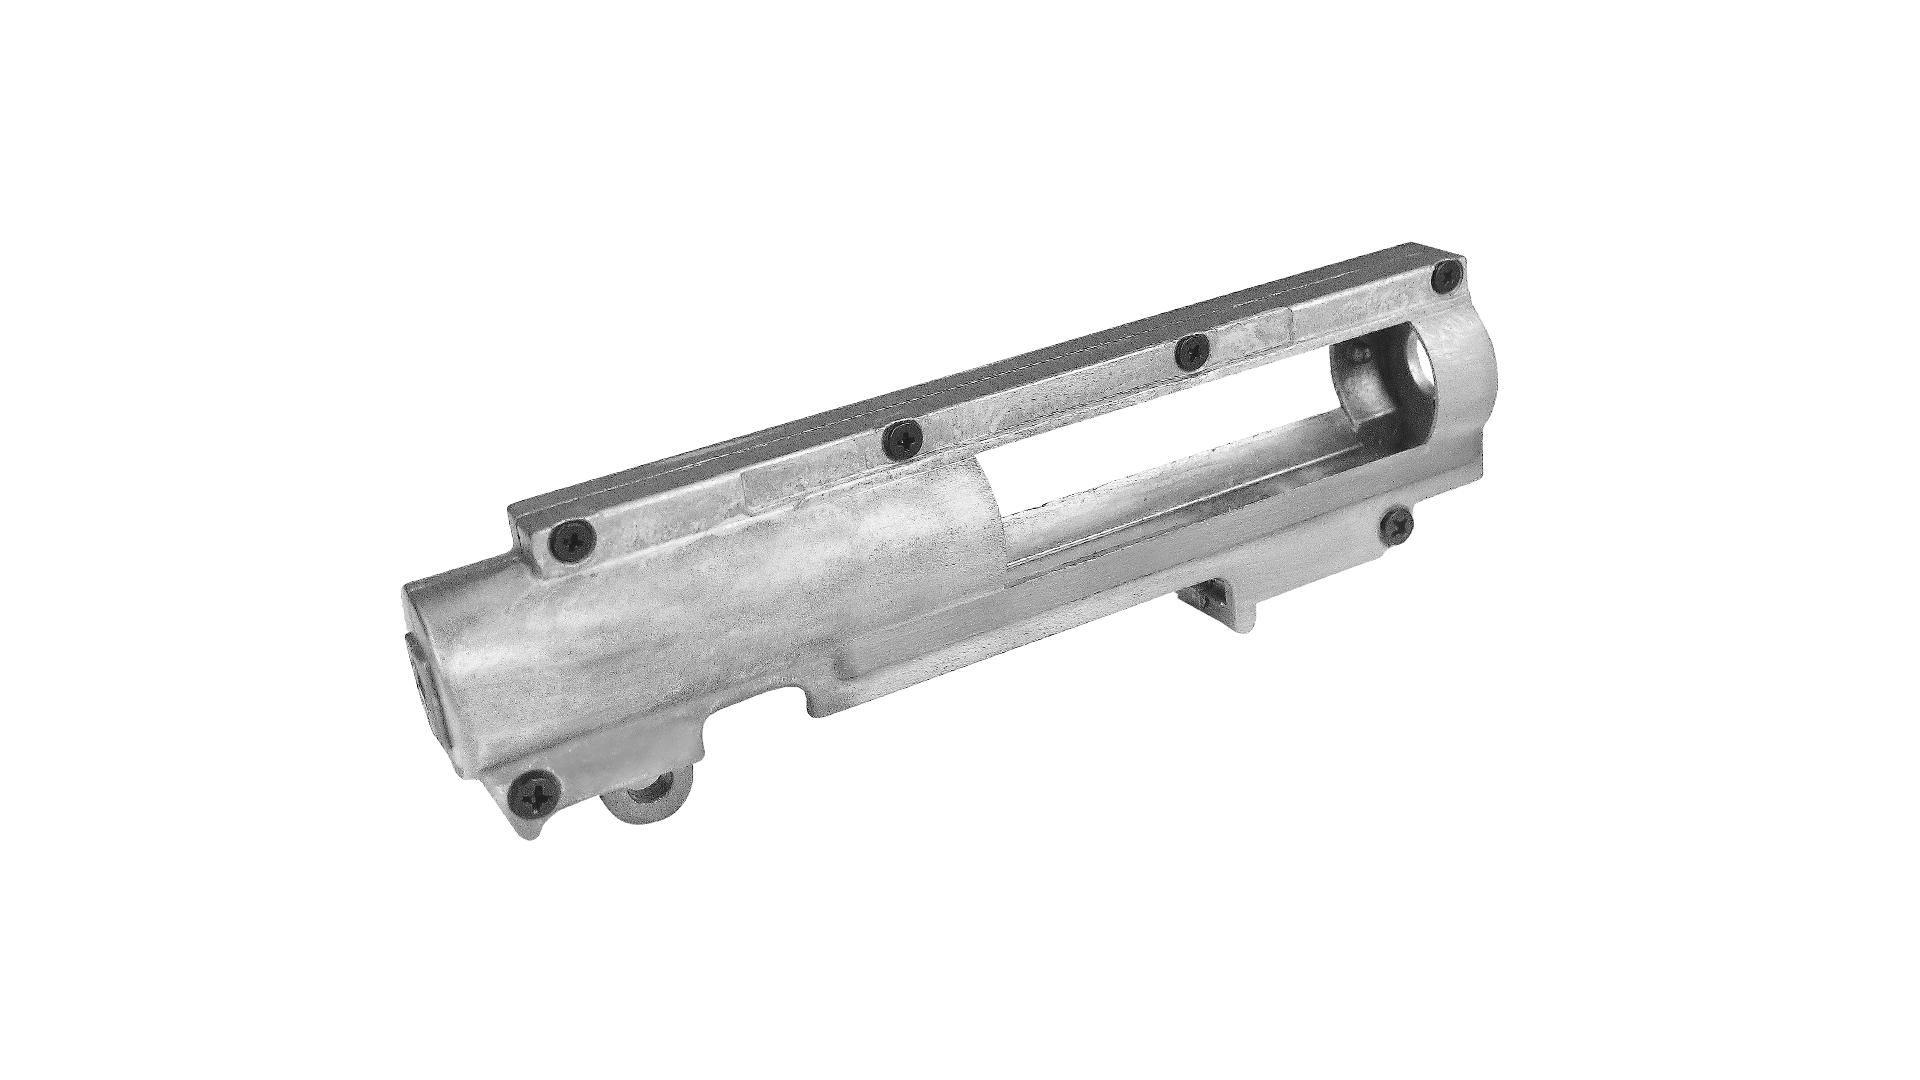 【Discontinued】【MA-34】CS4 UPPER GEARBOX SHELL (Empty)